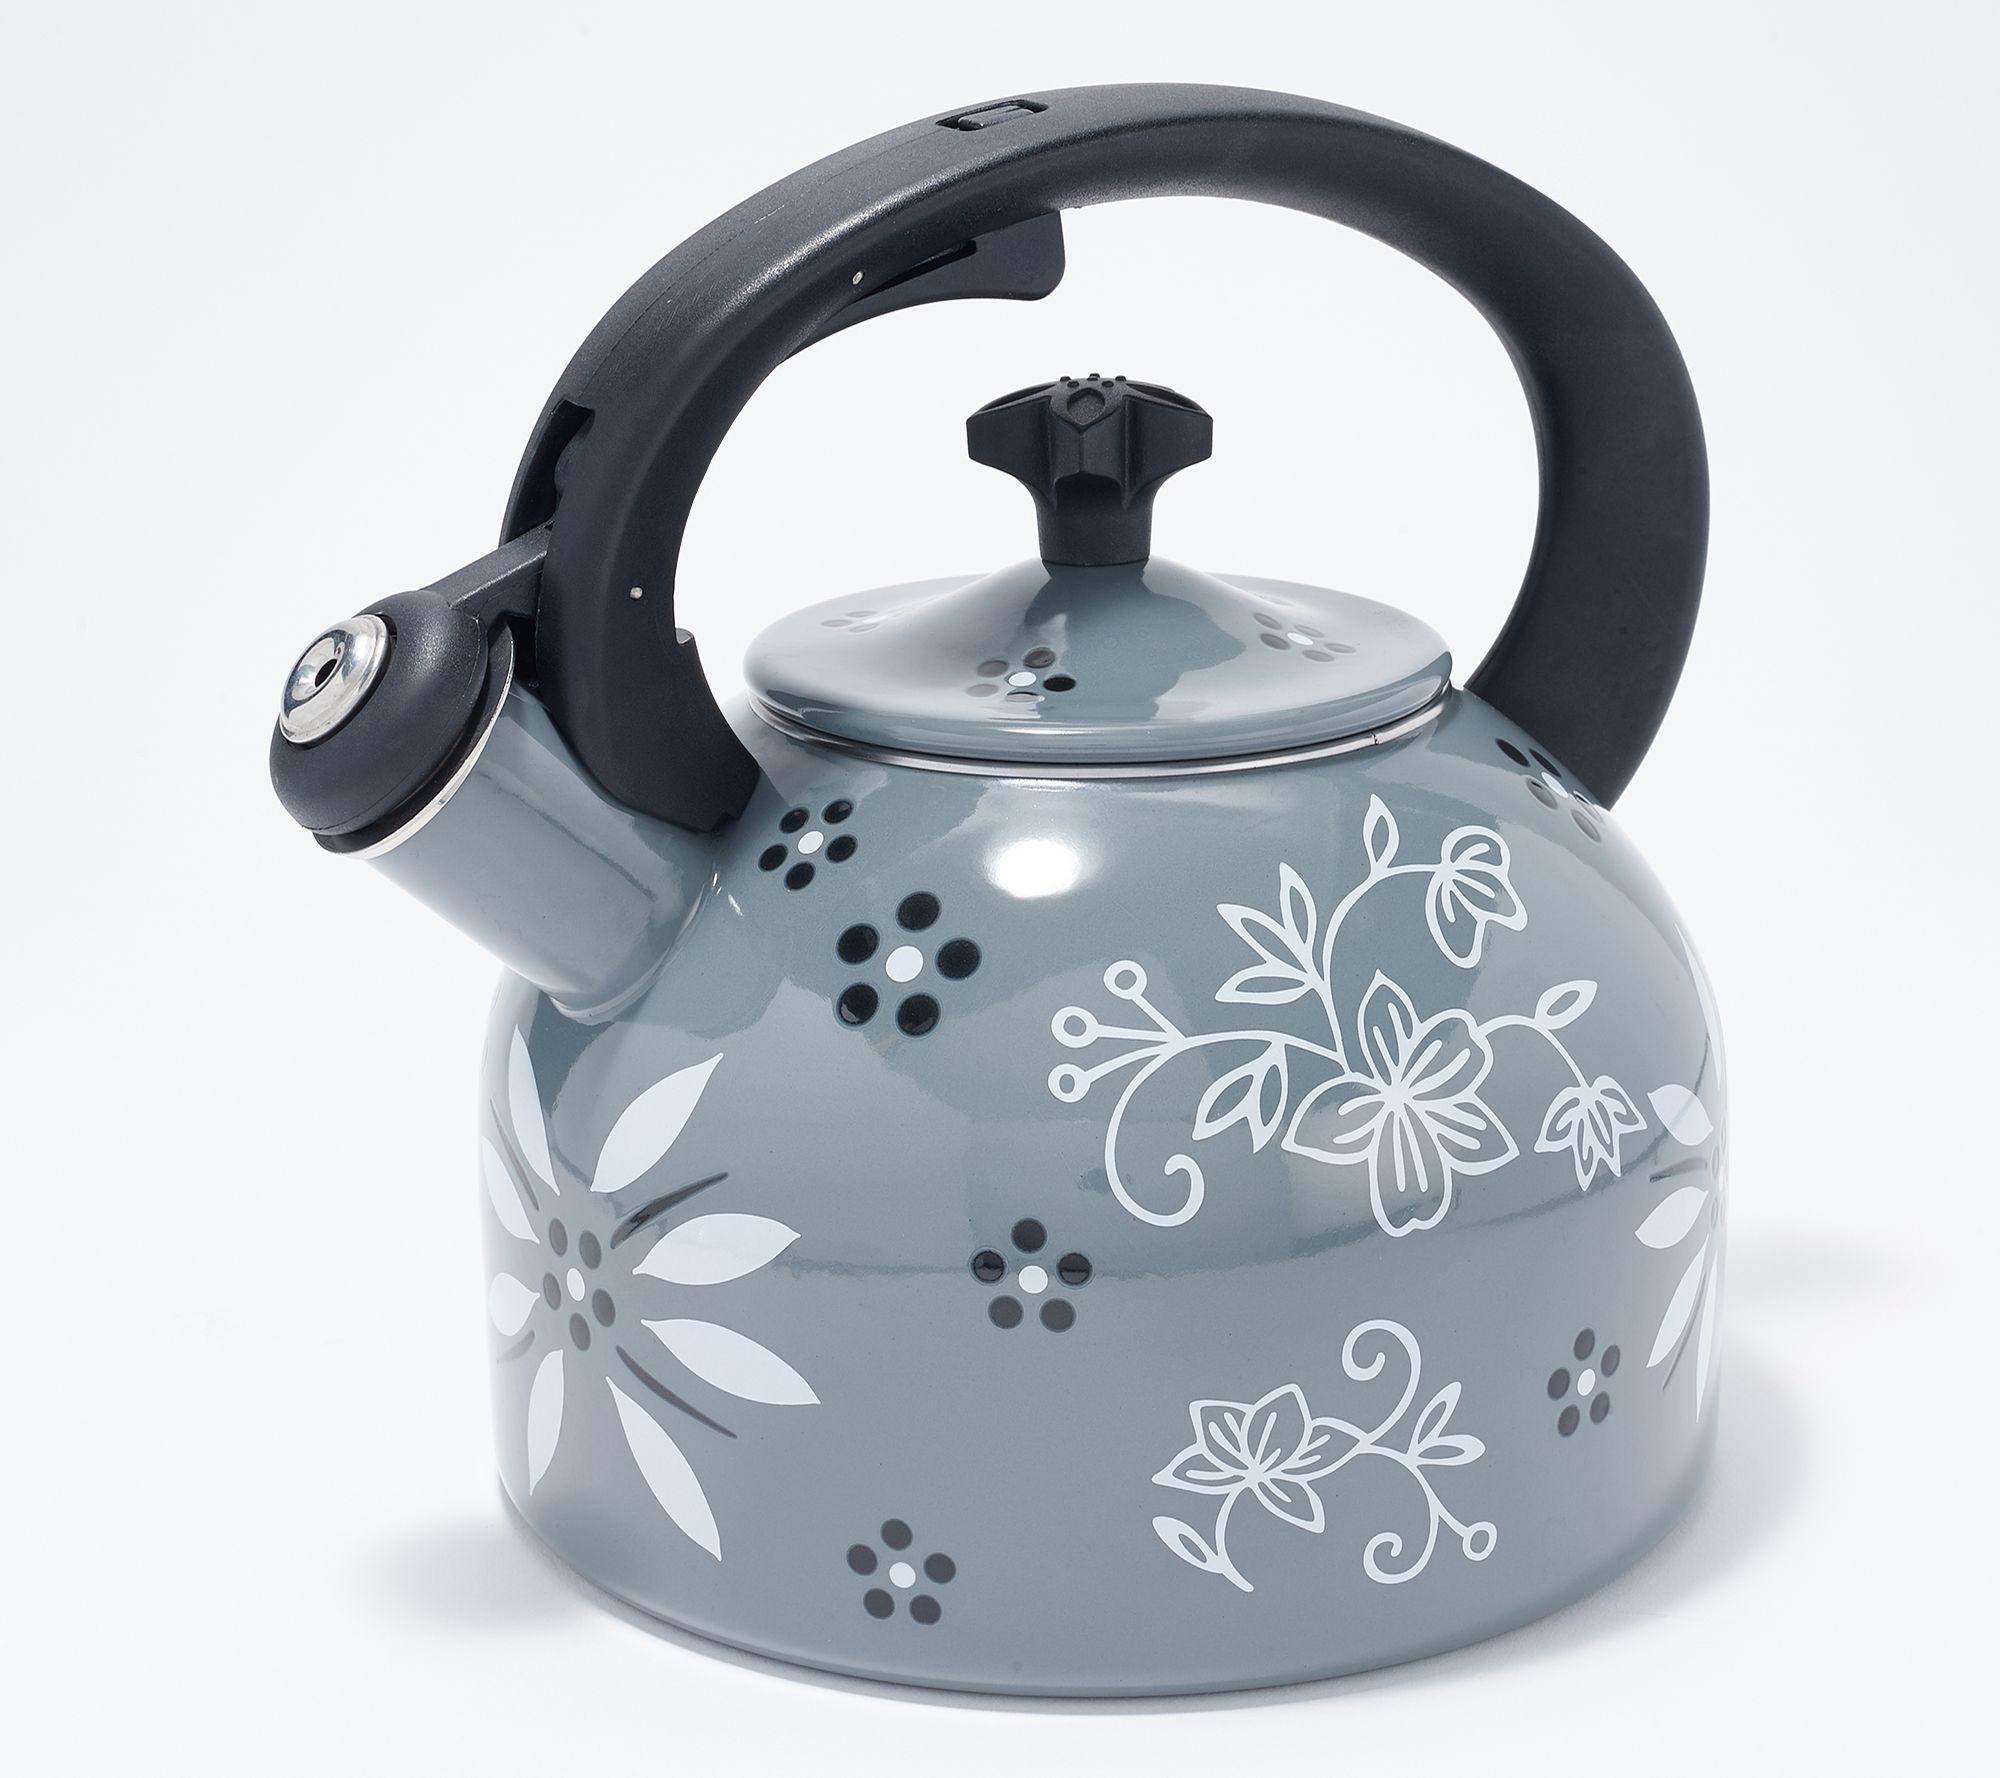 Alright tea addicts, what's your dream kettle? Looking for temp